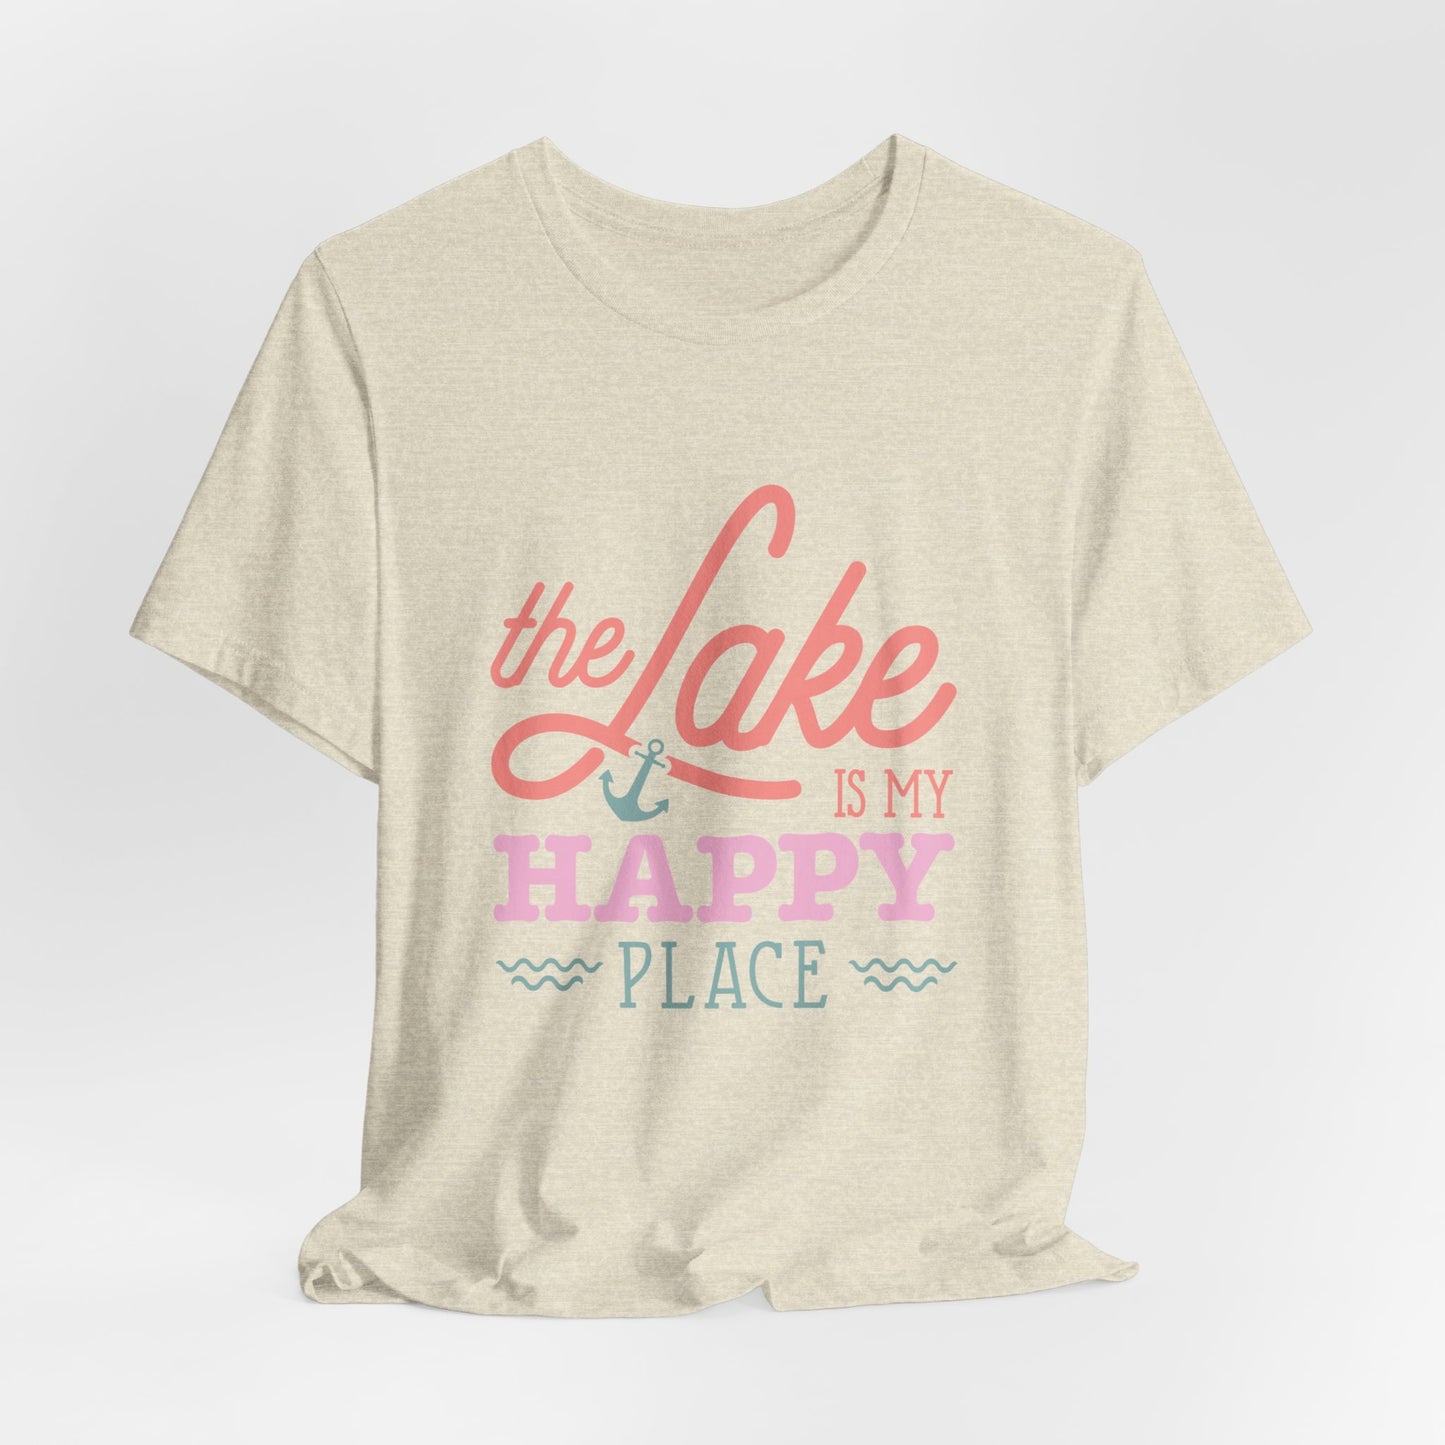 The Lake is My Happy Place Women's Short Sleeve Tee